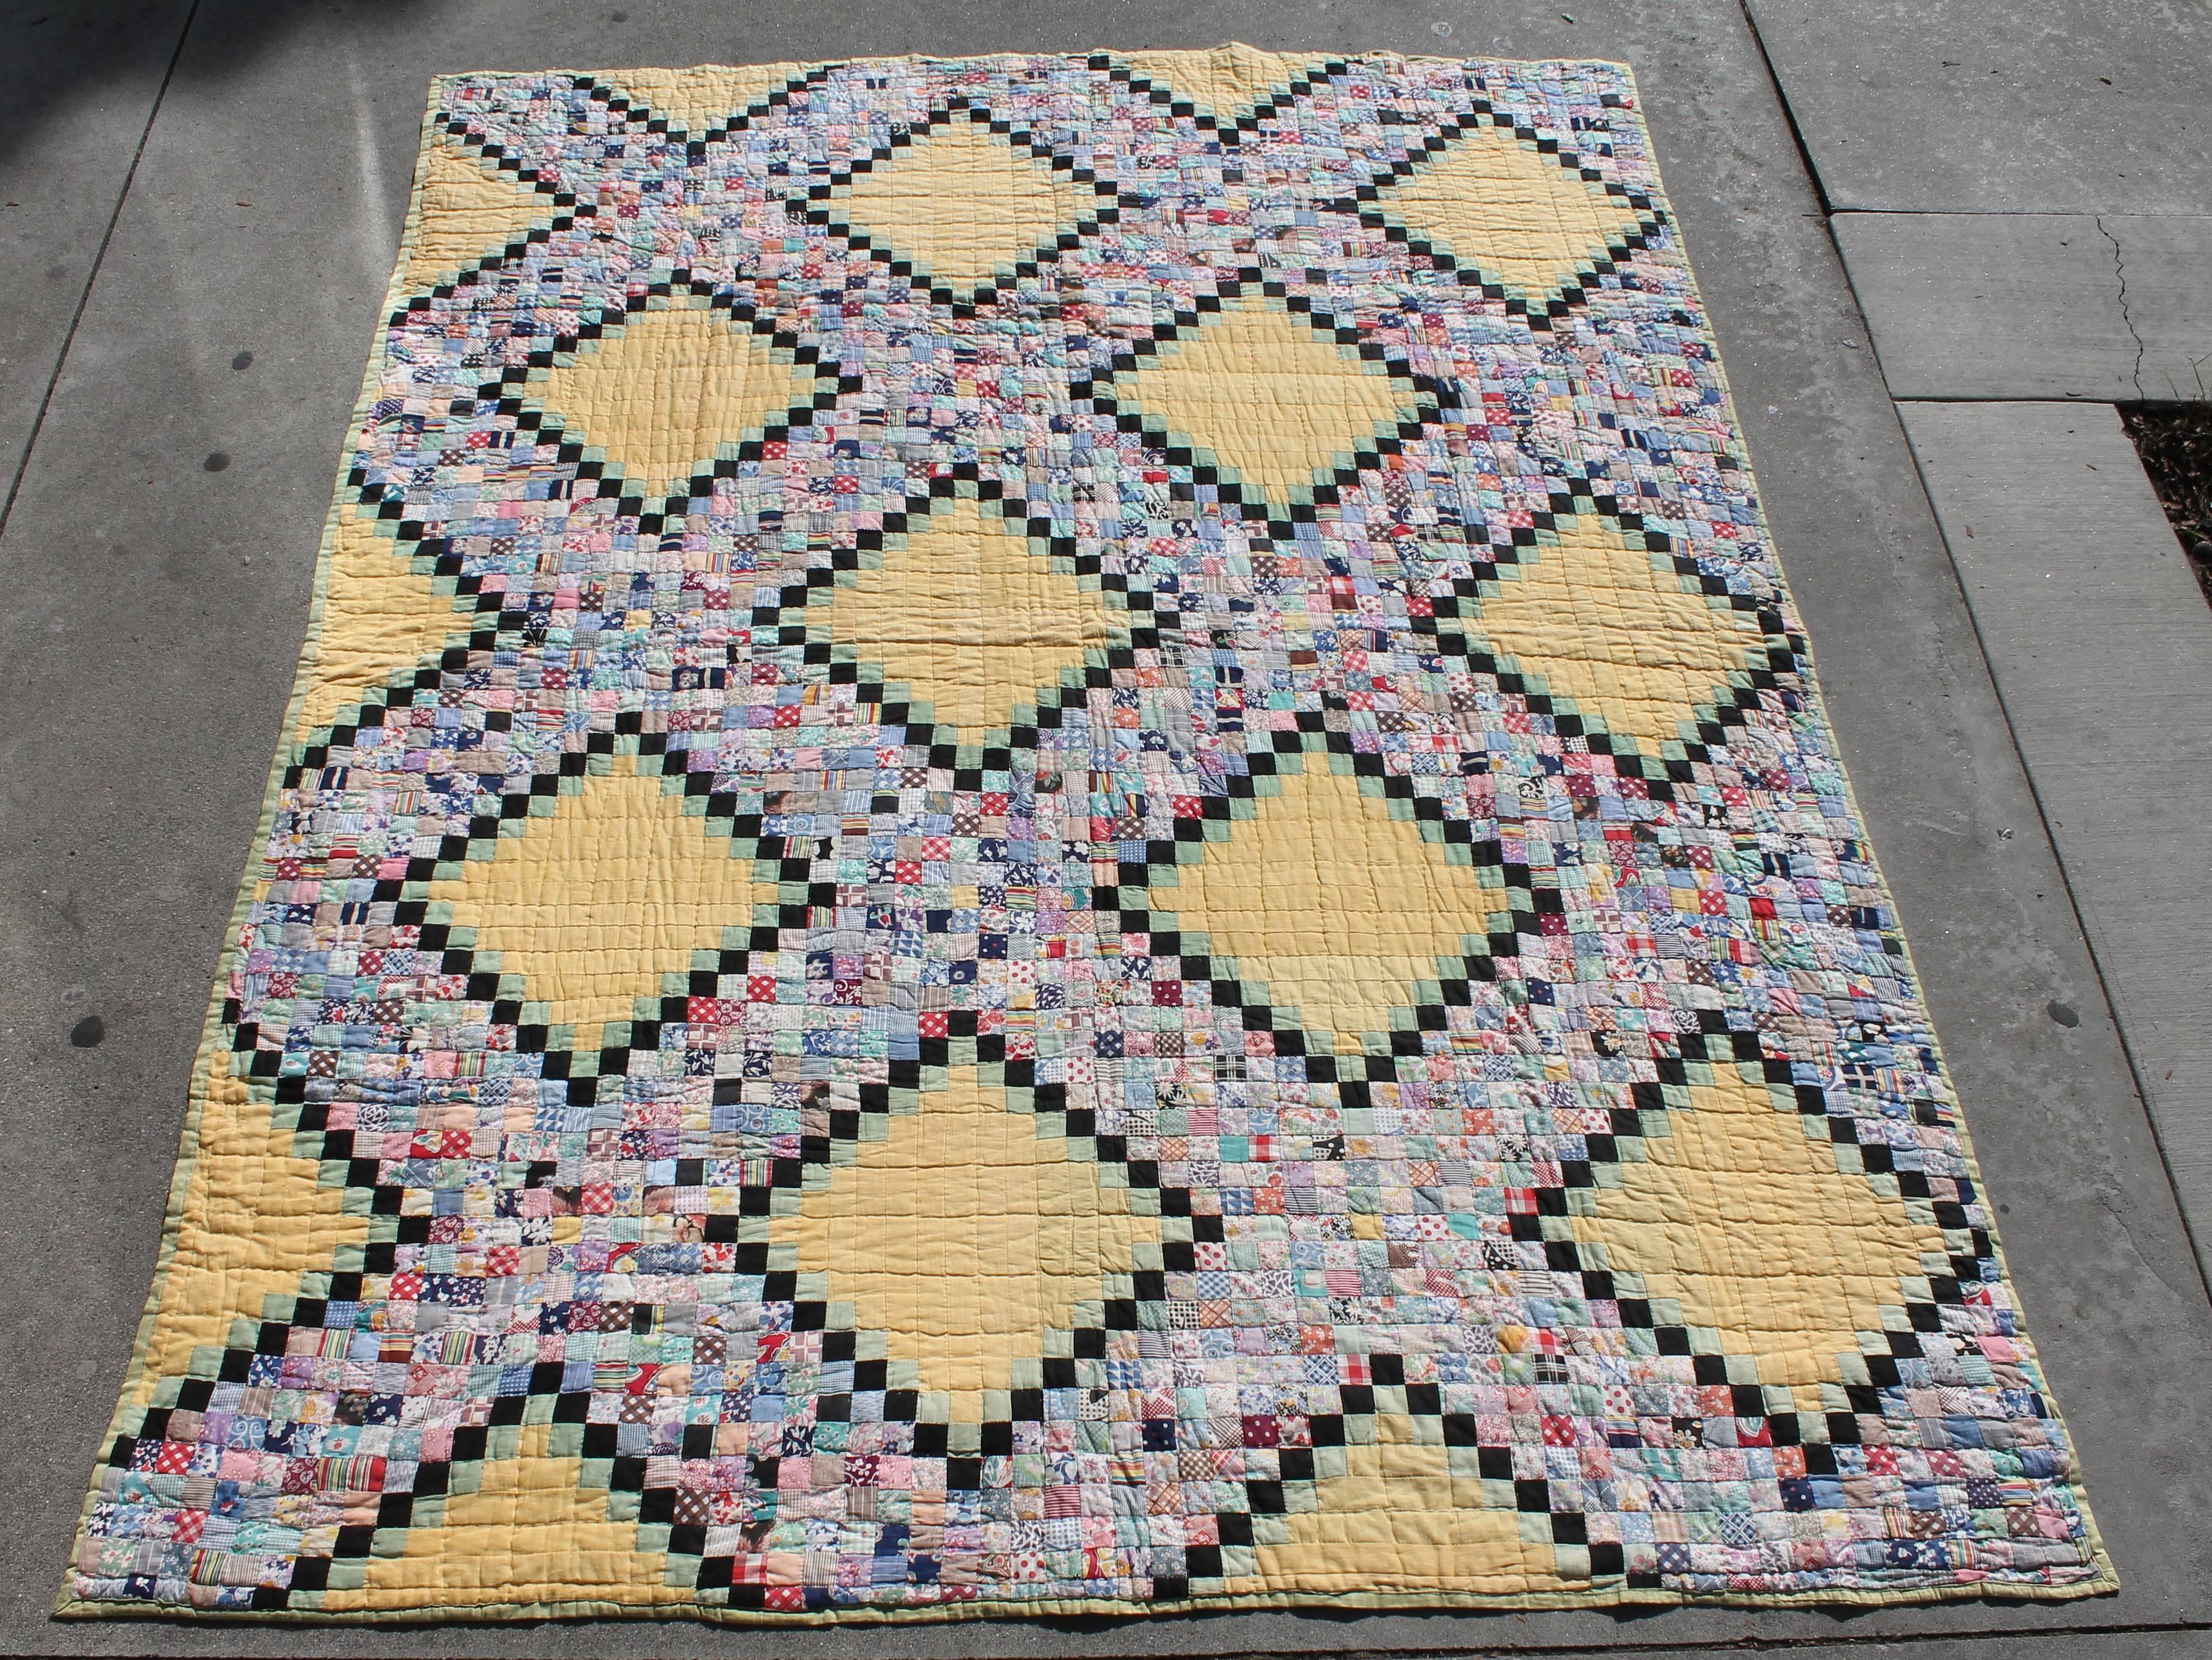 This tiny pieced postage stamp chain is in good condition. The yellow and green ground is a light nice shade. This quilt is comprised of floral feed sack fabrics.